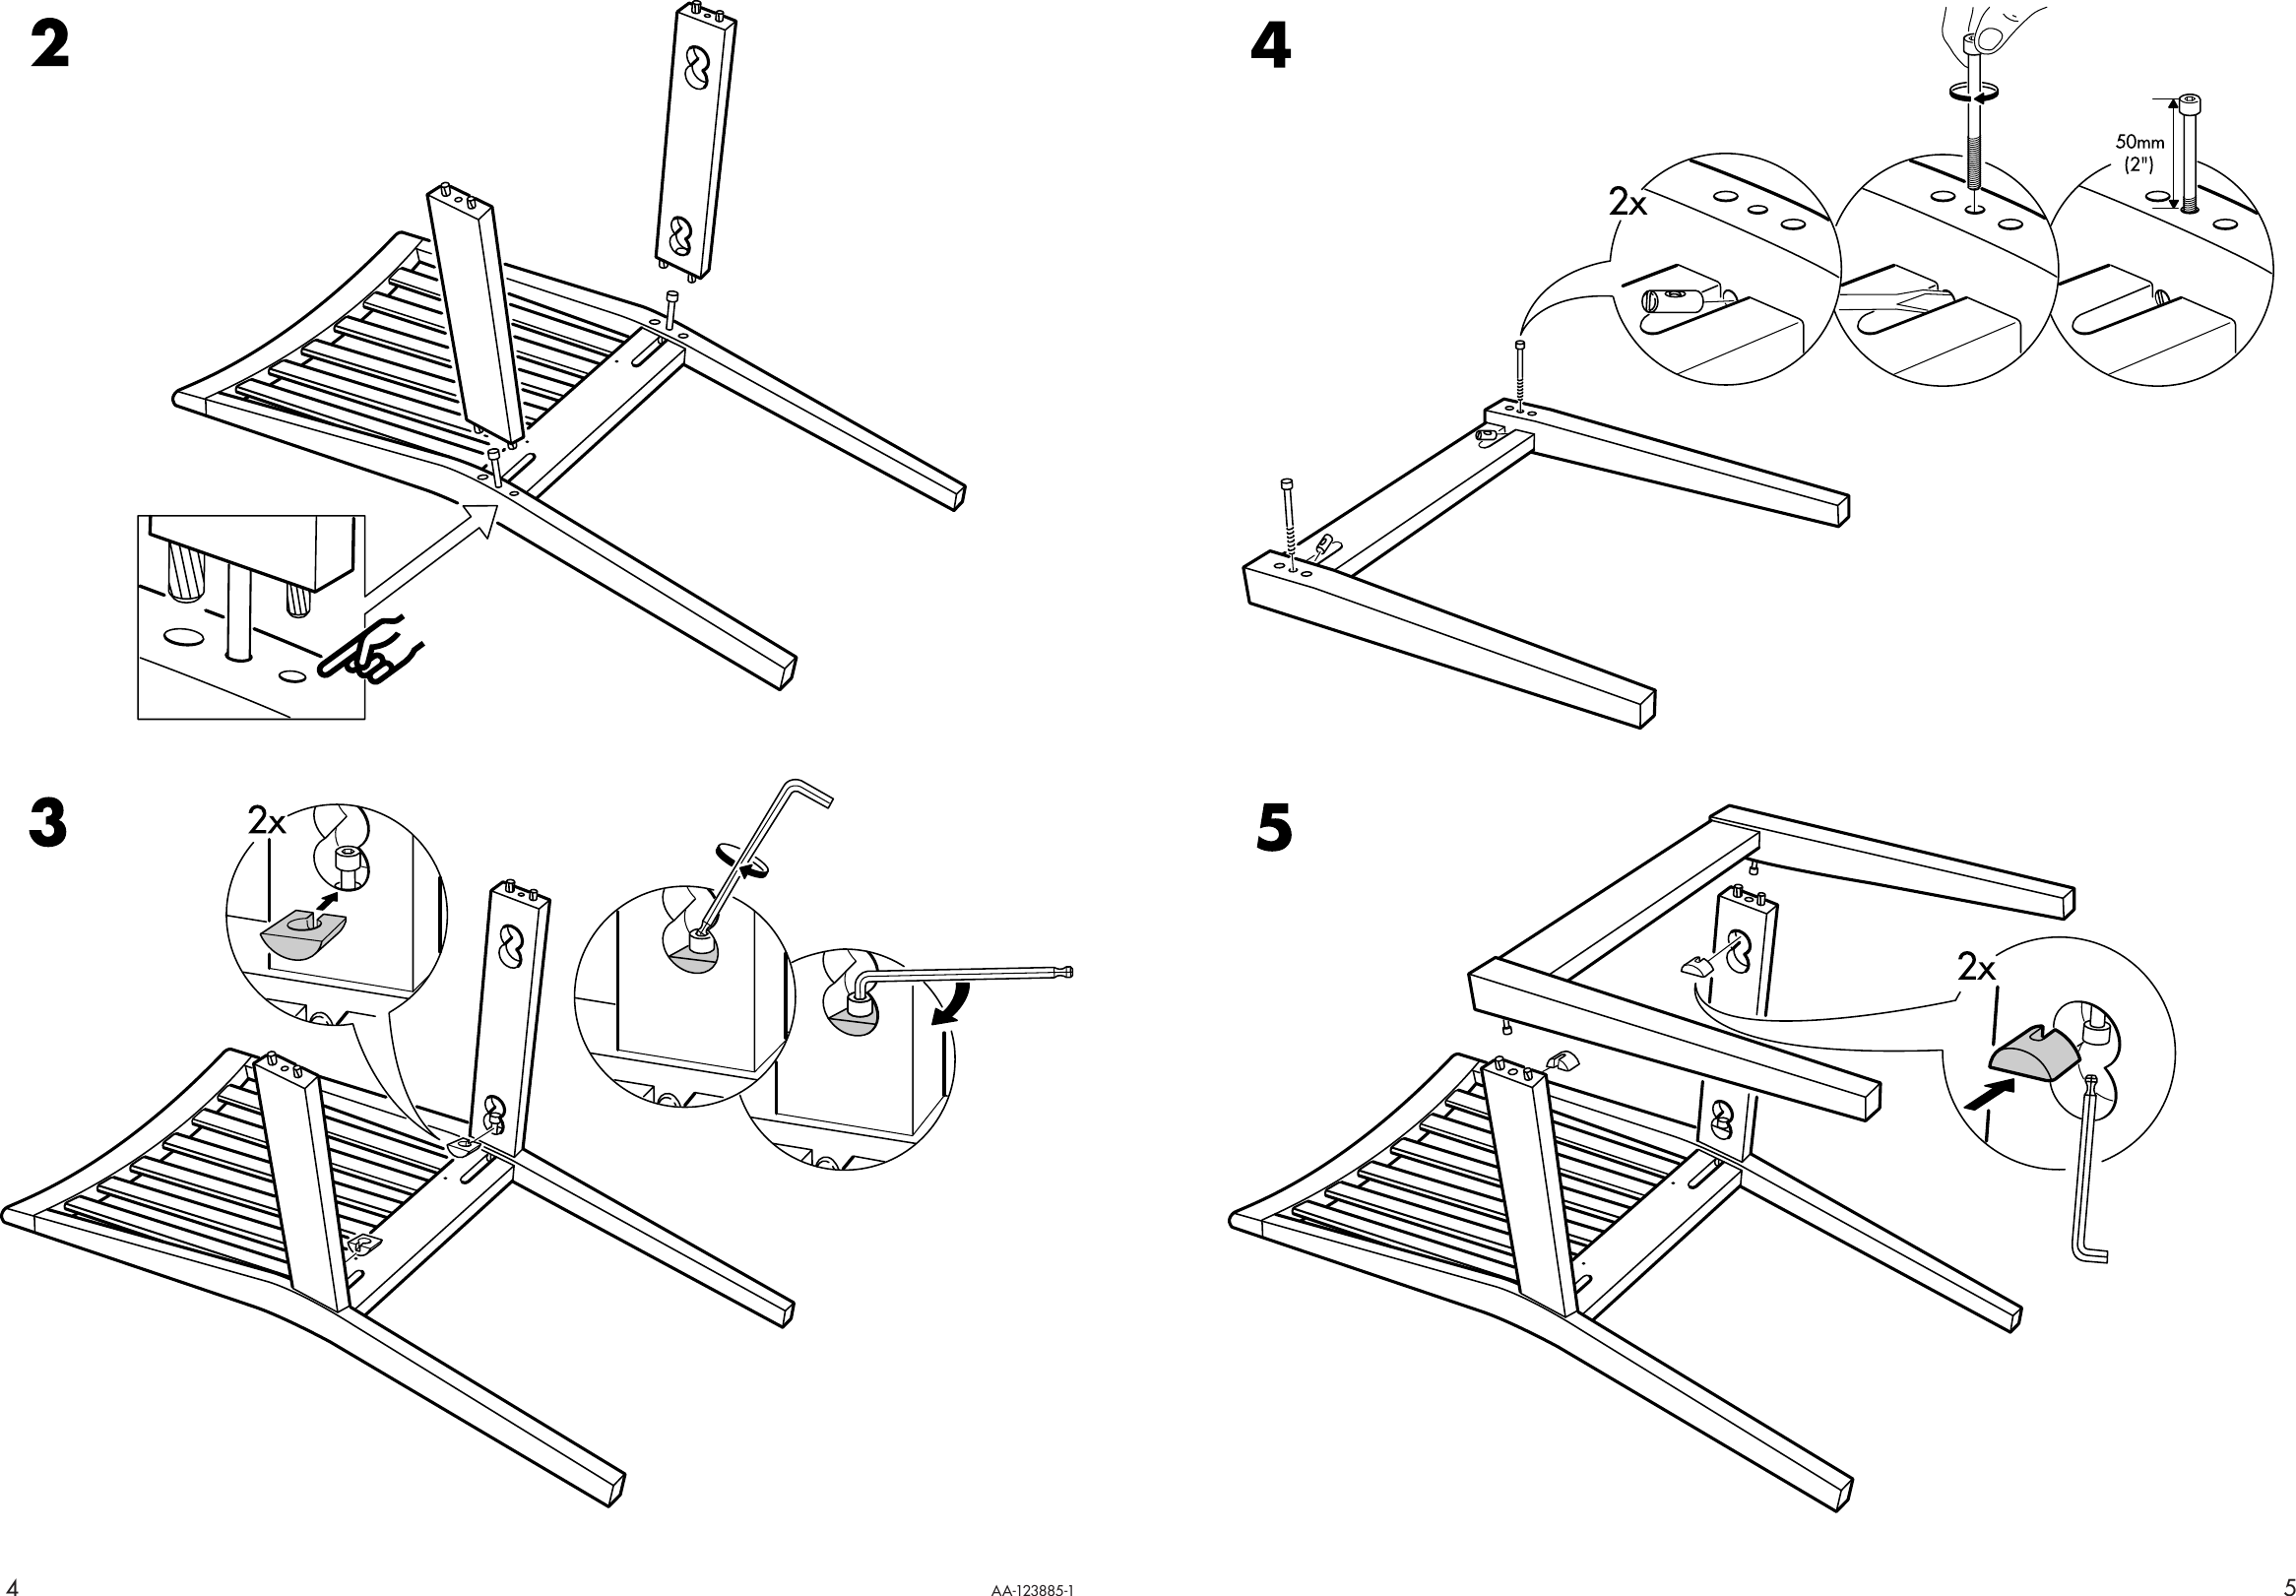 Page 4 of 4 - Ikea Ikea-Egon-Chair-Assembly-Instruction-2  Ikea-egon-chair-assembly-instruction